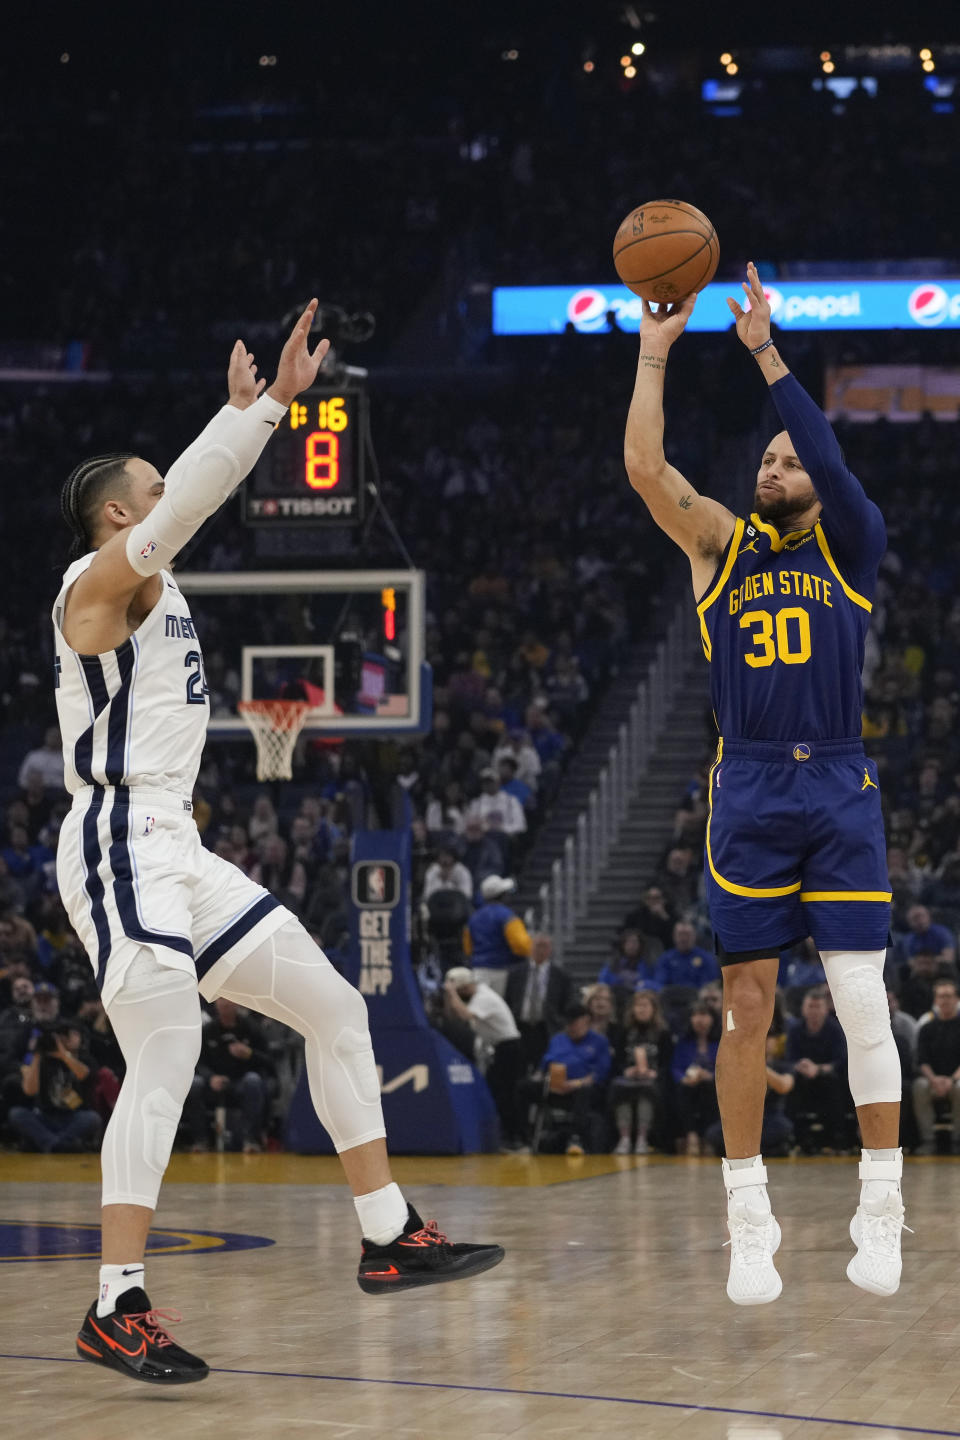 Golden State Warriors guard Stephen Curry, right, shoots a 3-point basket over Memphis Grizzlies forward Dillon Brooks during the first half of an NBA basketball game in San Francisco, Wednesday, Jan. 25, 2023. (AP Photo/Godofredo A. Vásquez)